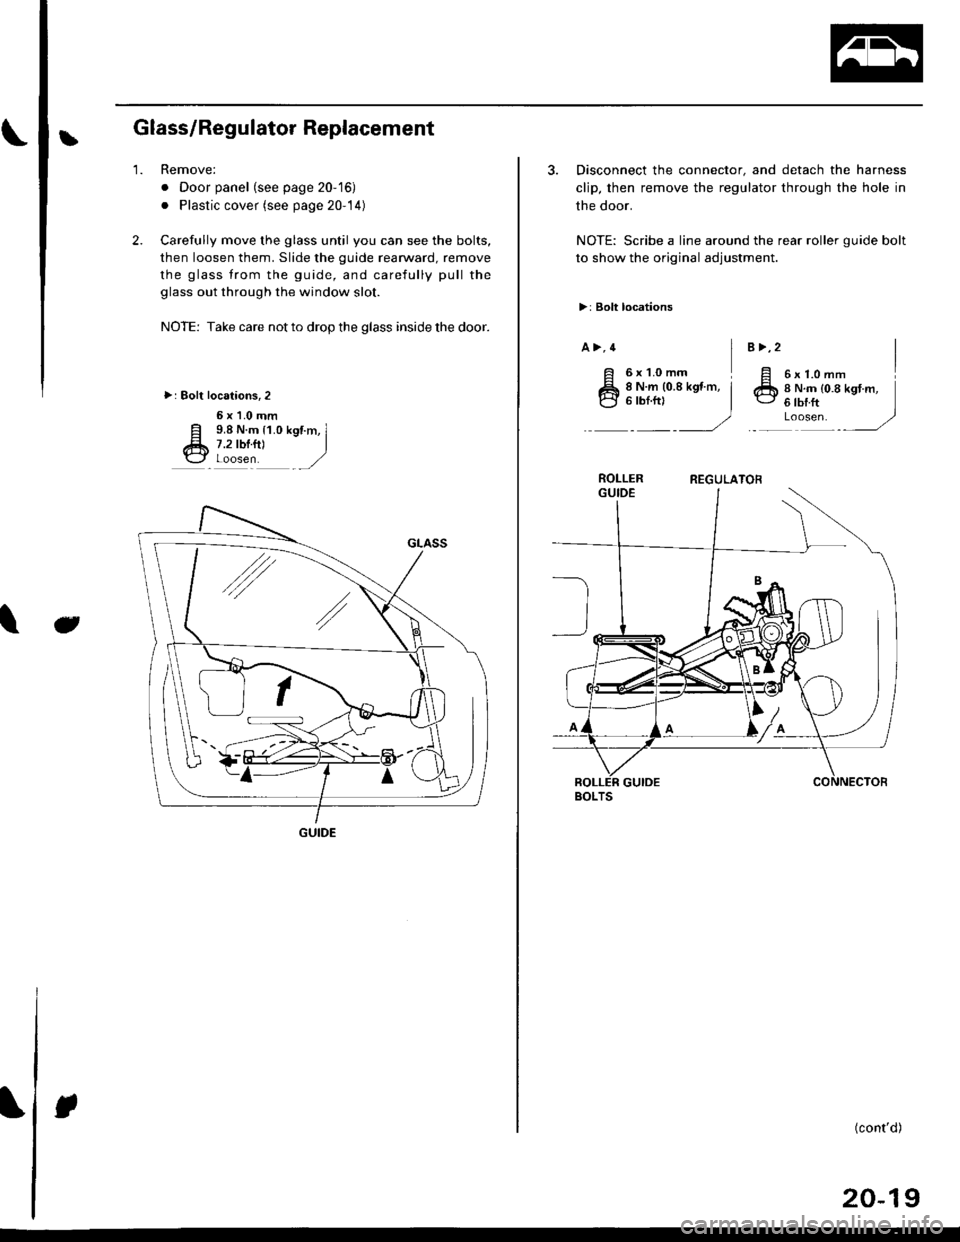 HONDA CIVIC 1998 6.G Workshop Manual LGlass/Regulator Replacement
2.
1.Remove:
. Door panel (see page 20-16)
. Plastic cover (see page 20-14)
Carefully move the glass until you can see the bolts,
then loosen them. Slide the guide rearwa